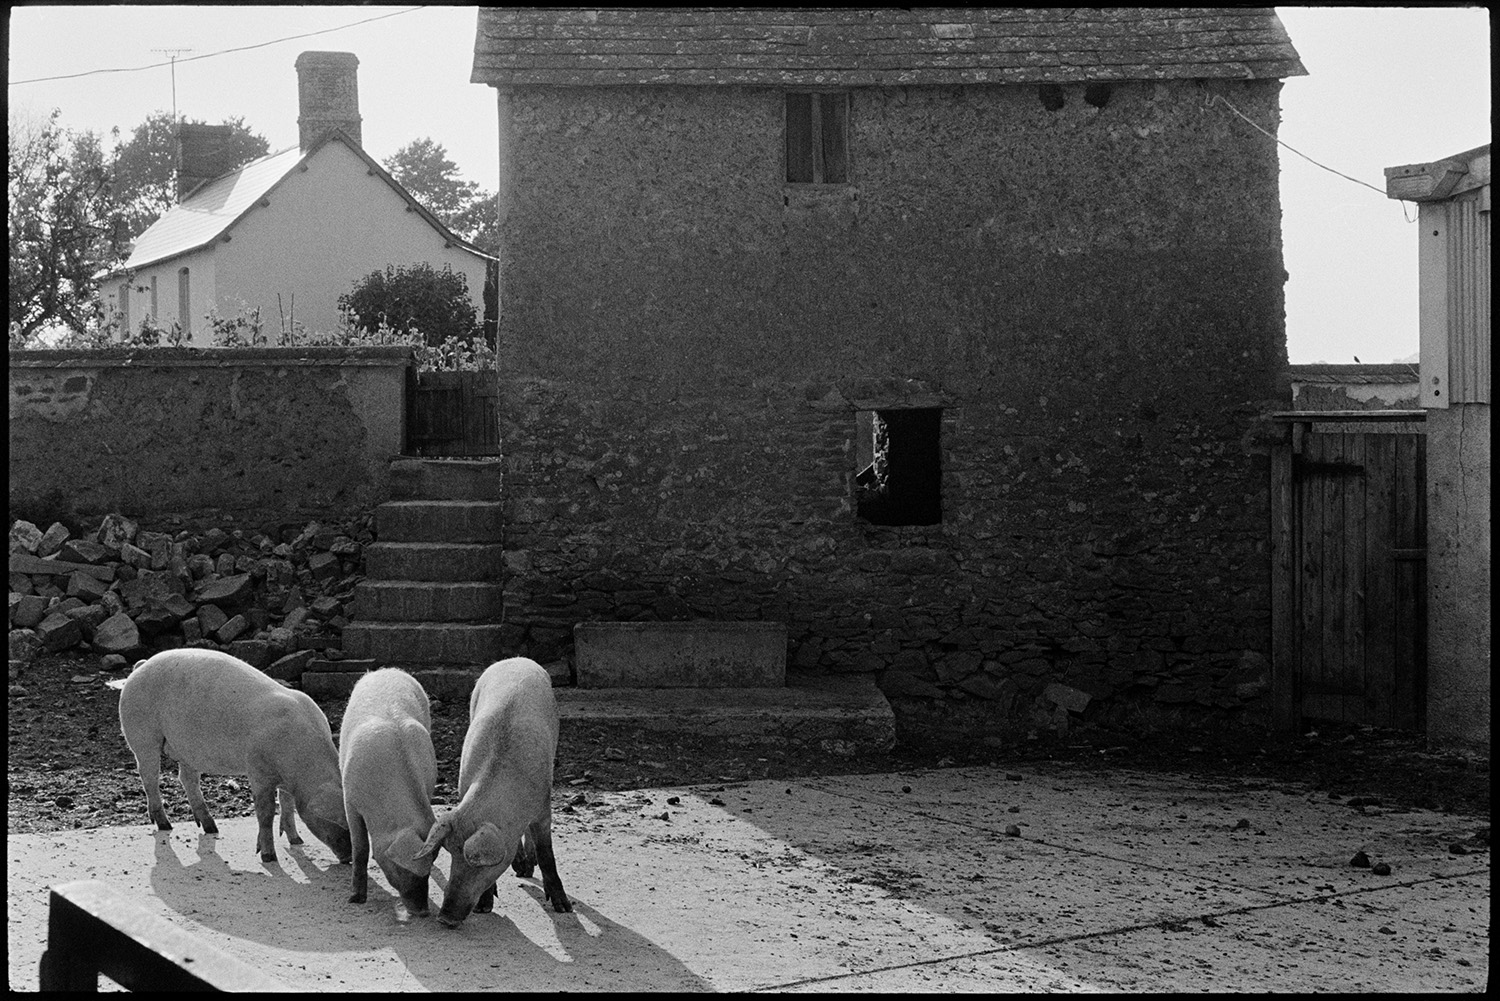 Pigs in farmyard. 
[Three pigs in the farmyard at Parsonage, Iddesleigh. They are stood in front of a stone, cob and tiled barn.]